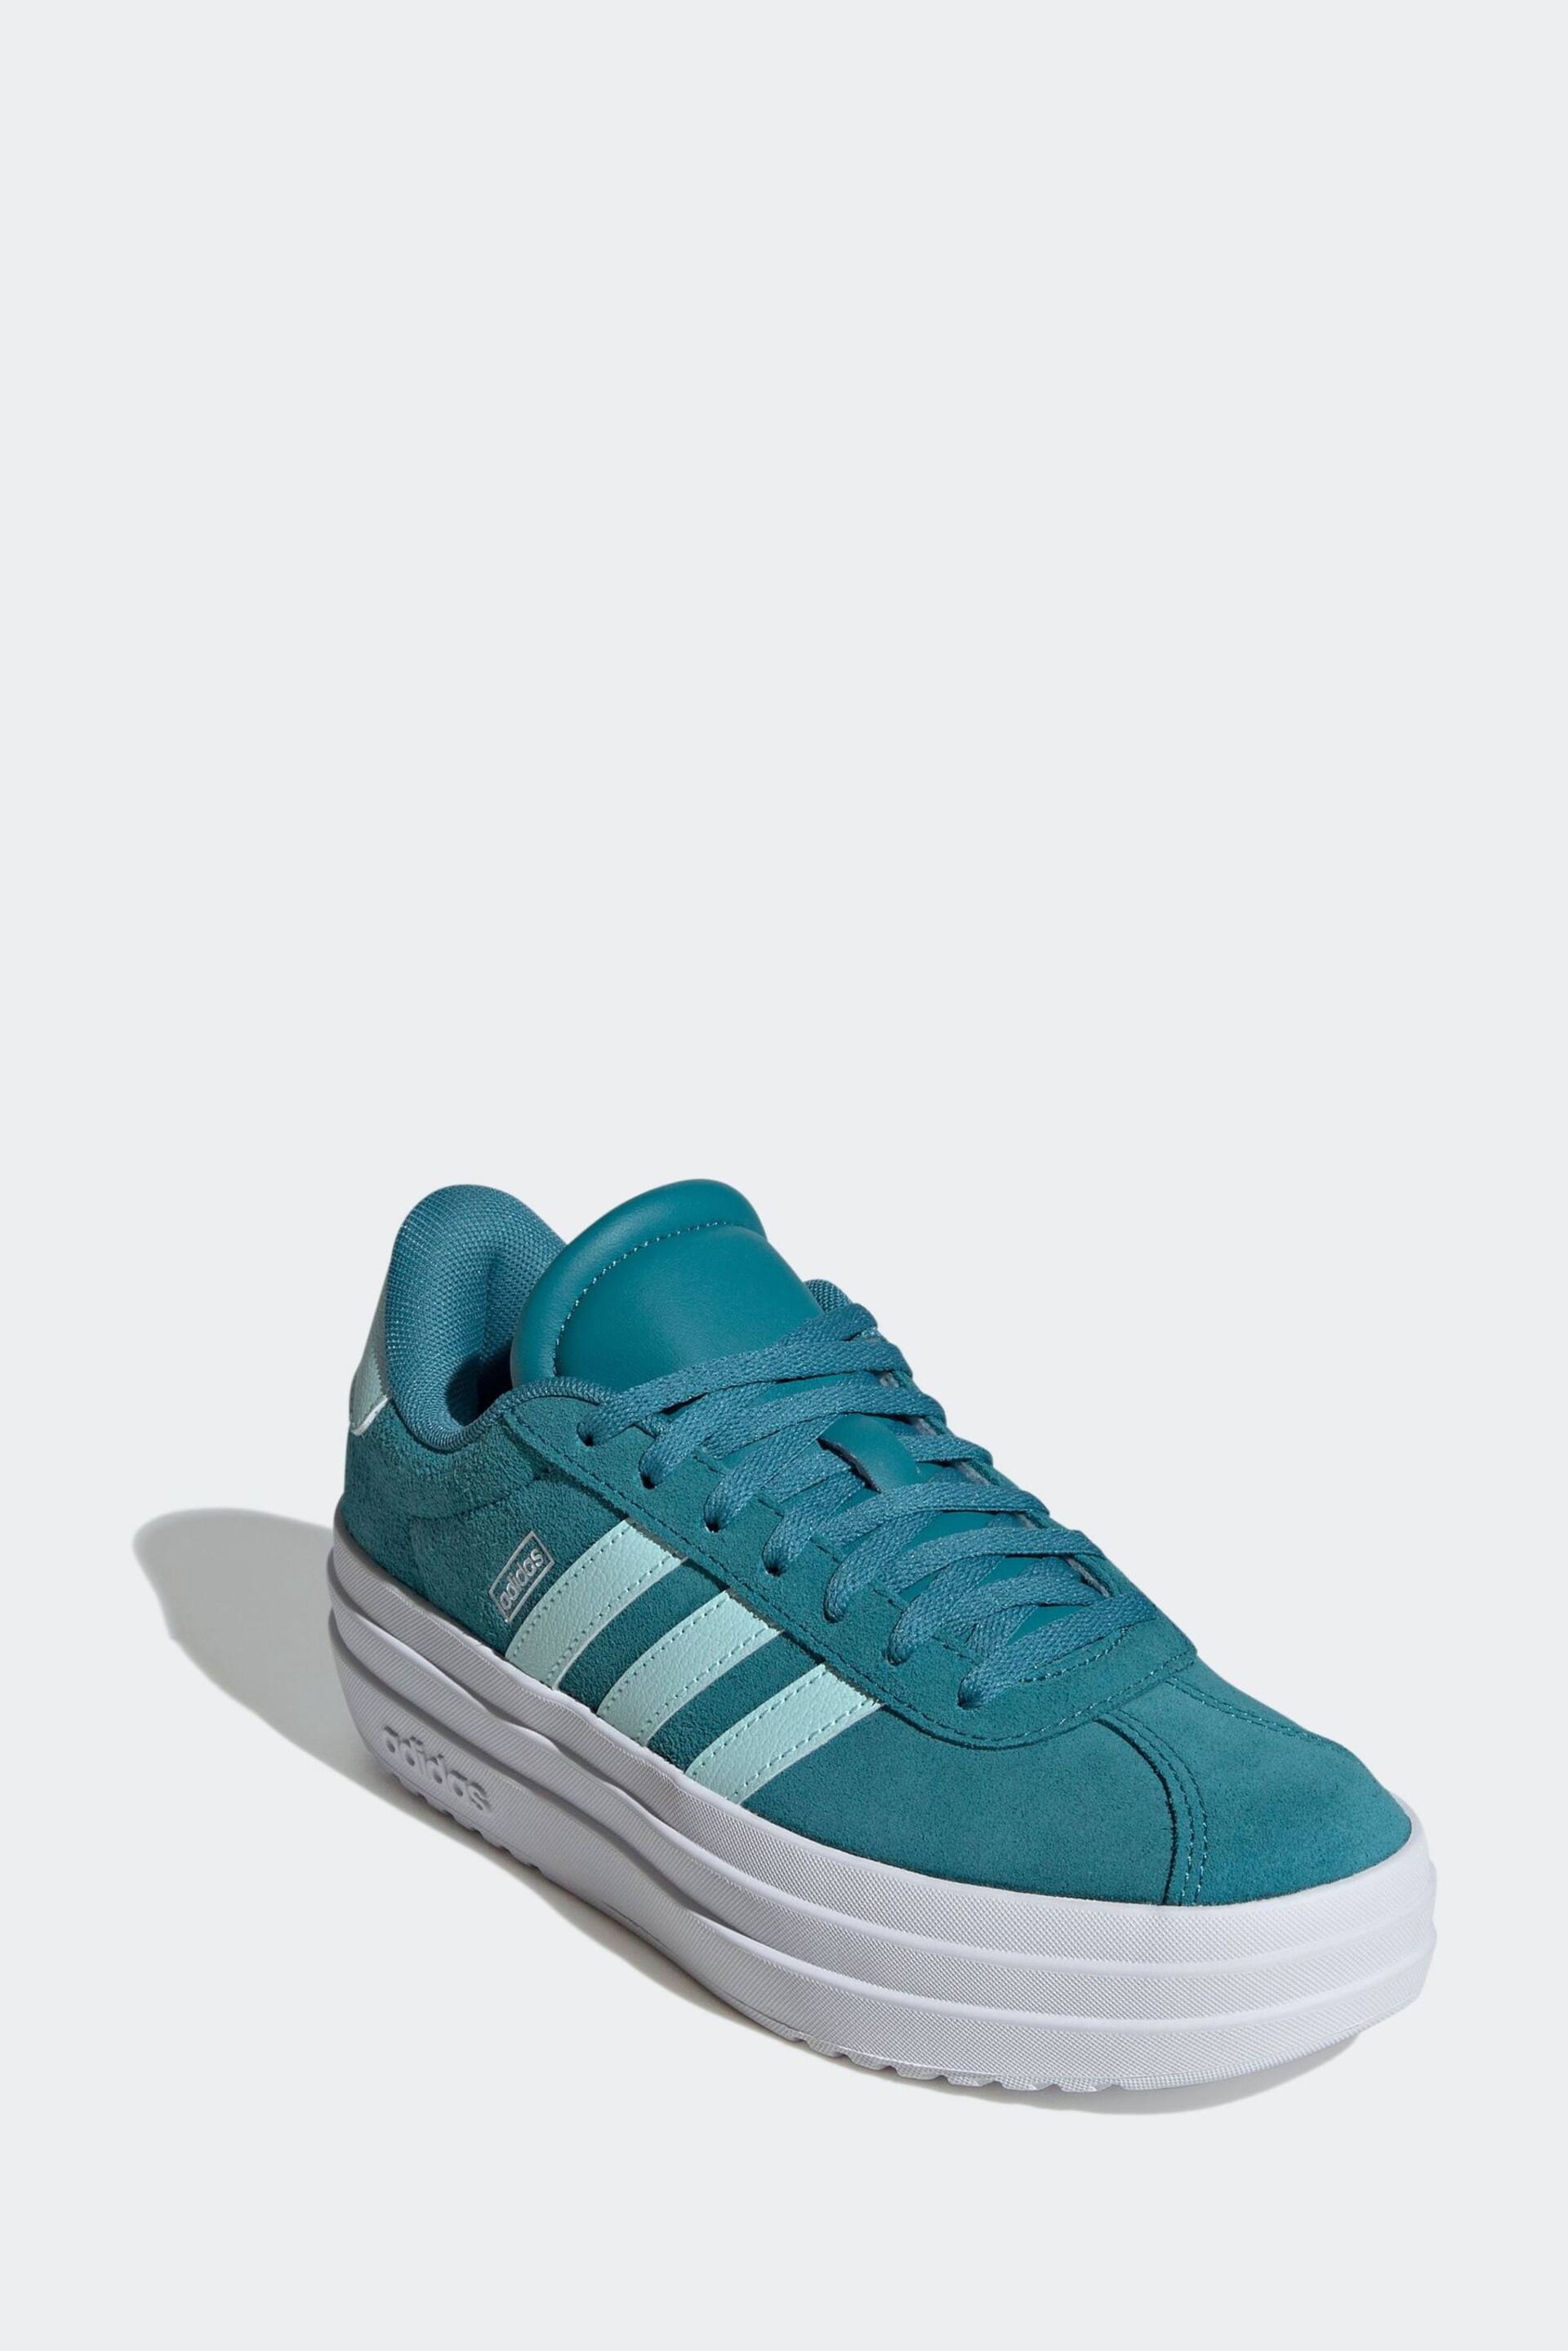 adidas Blue/White Kids VL Court Bold Trainers - Image 5 of 13